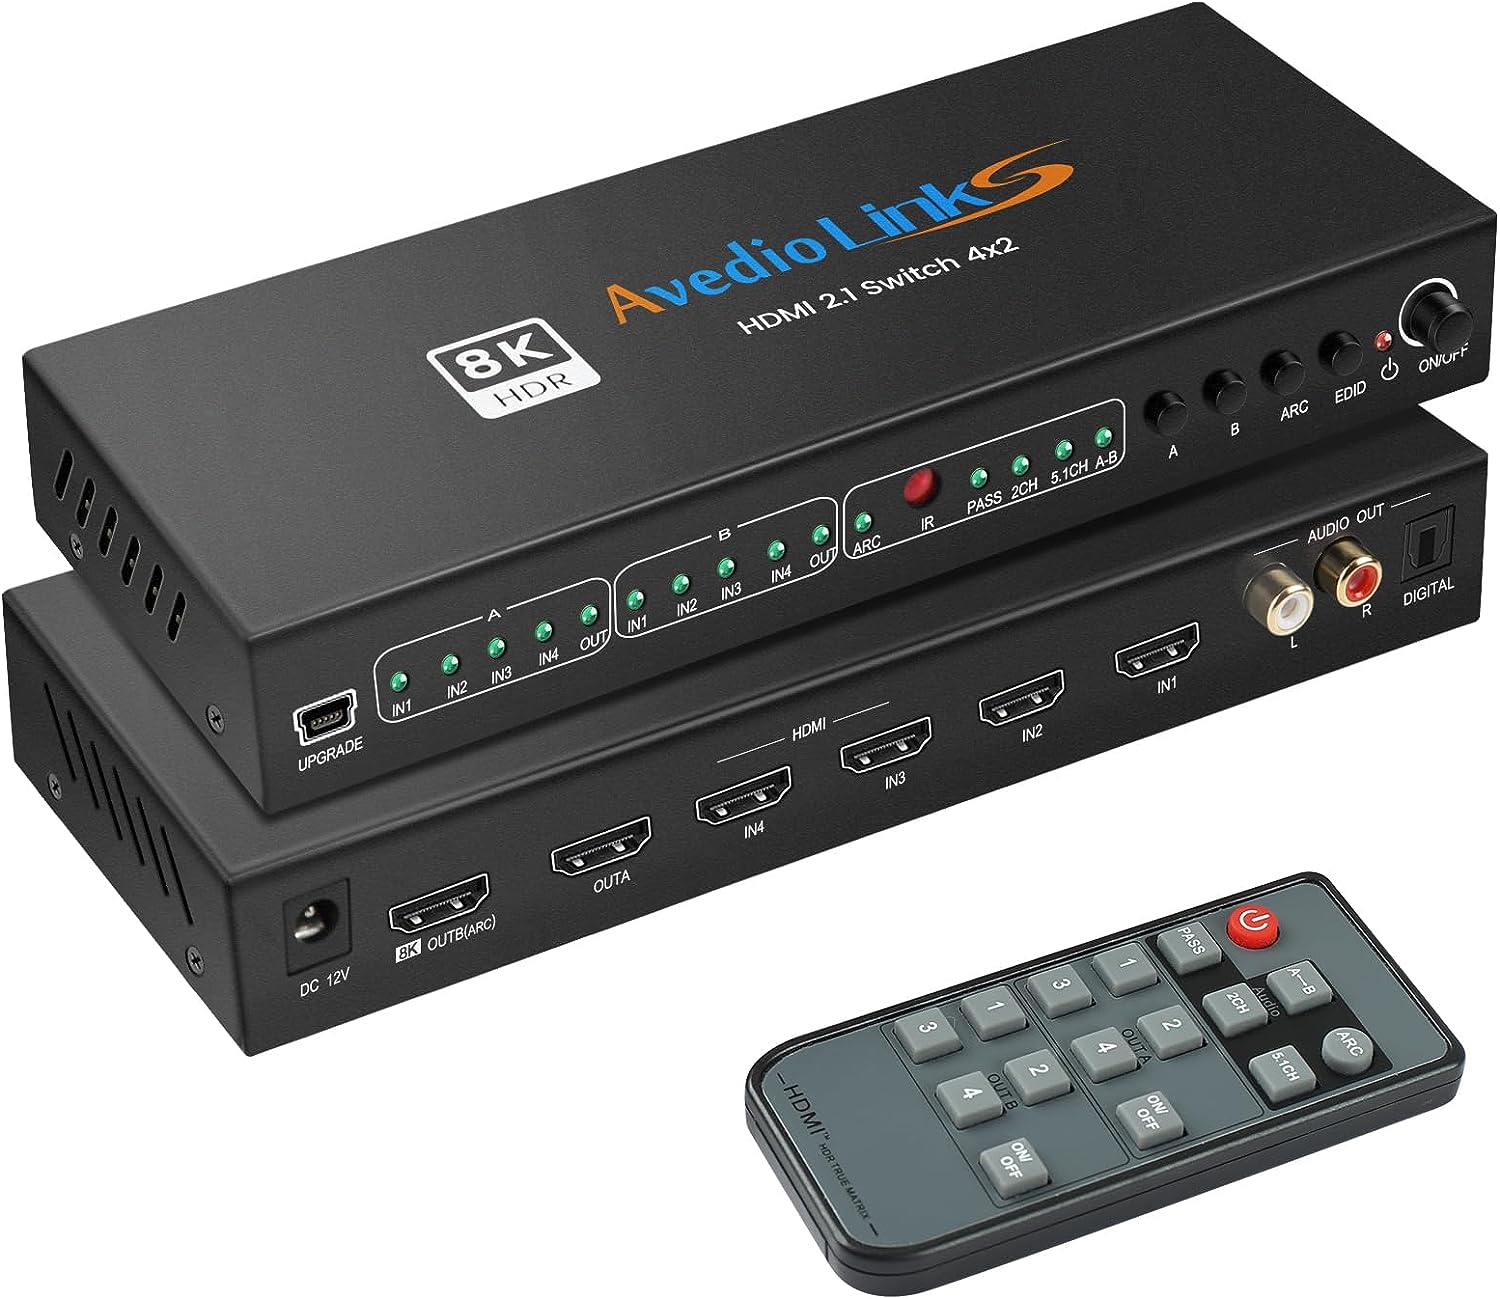 8K@60Hz HDMI Matrix Switch 4X2 with ARC, avedio links 4 in 2 Out HDMI2.1 Matrix HDMI Video Switcher Splitter+ Optical L/R Audio Extractor, Support 4K@120Hz HDR10 HDCP2.3 Auto Downscale with IR Remote